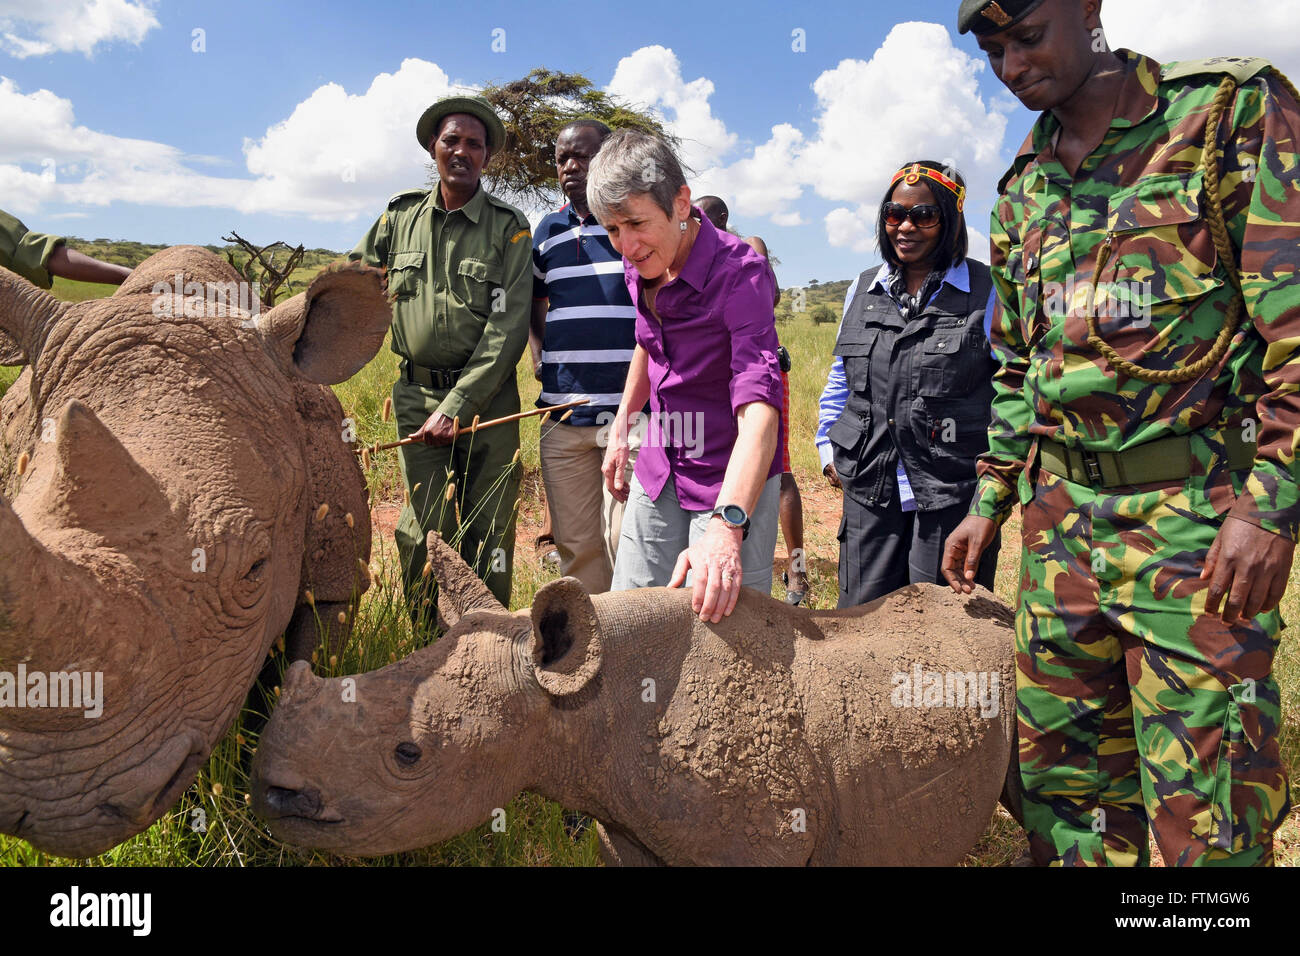 U.S. Secretary of Interior Sally Jewell pets a baby rhino during a visit to the Lewa Wildlife Conservancy in April 15, 2014 in Meru, Kenya. Stock Photo